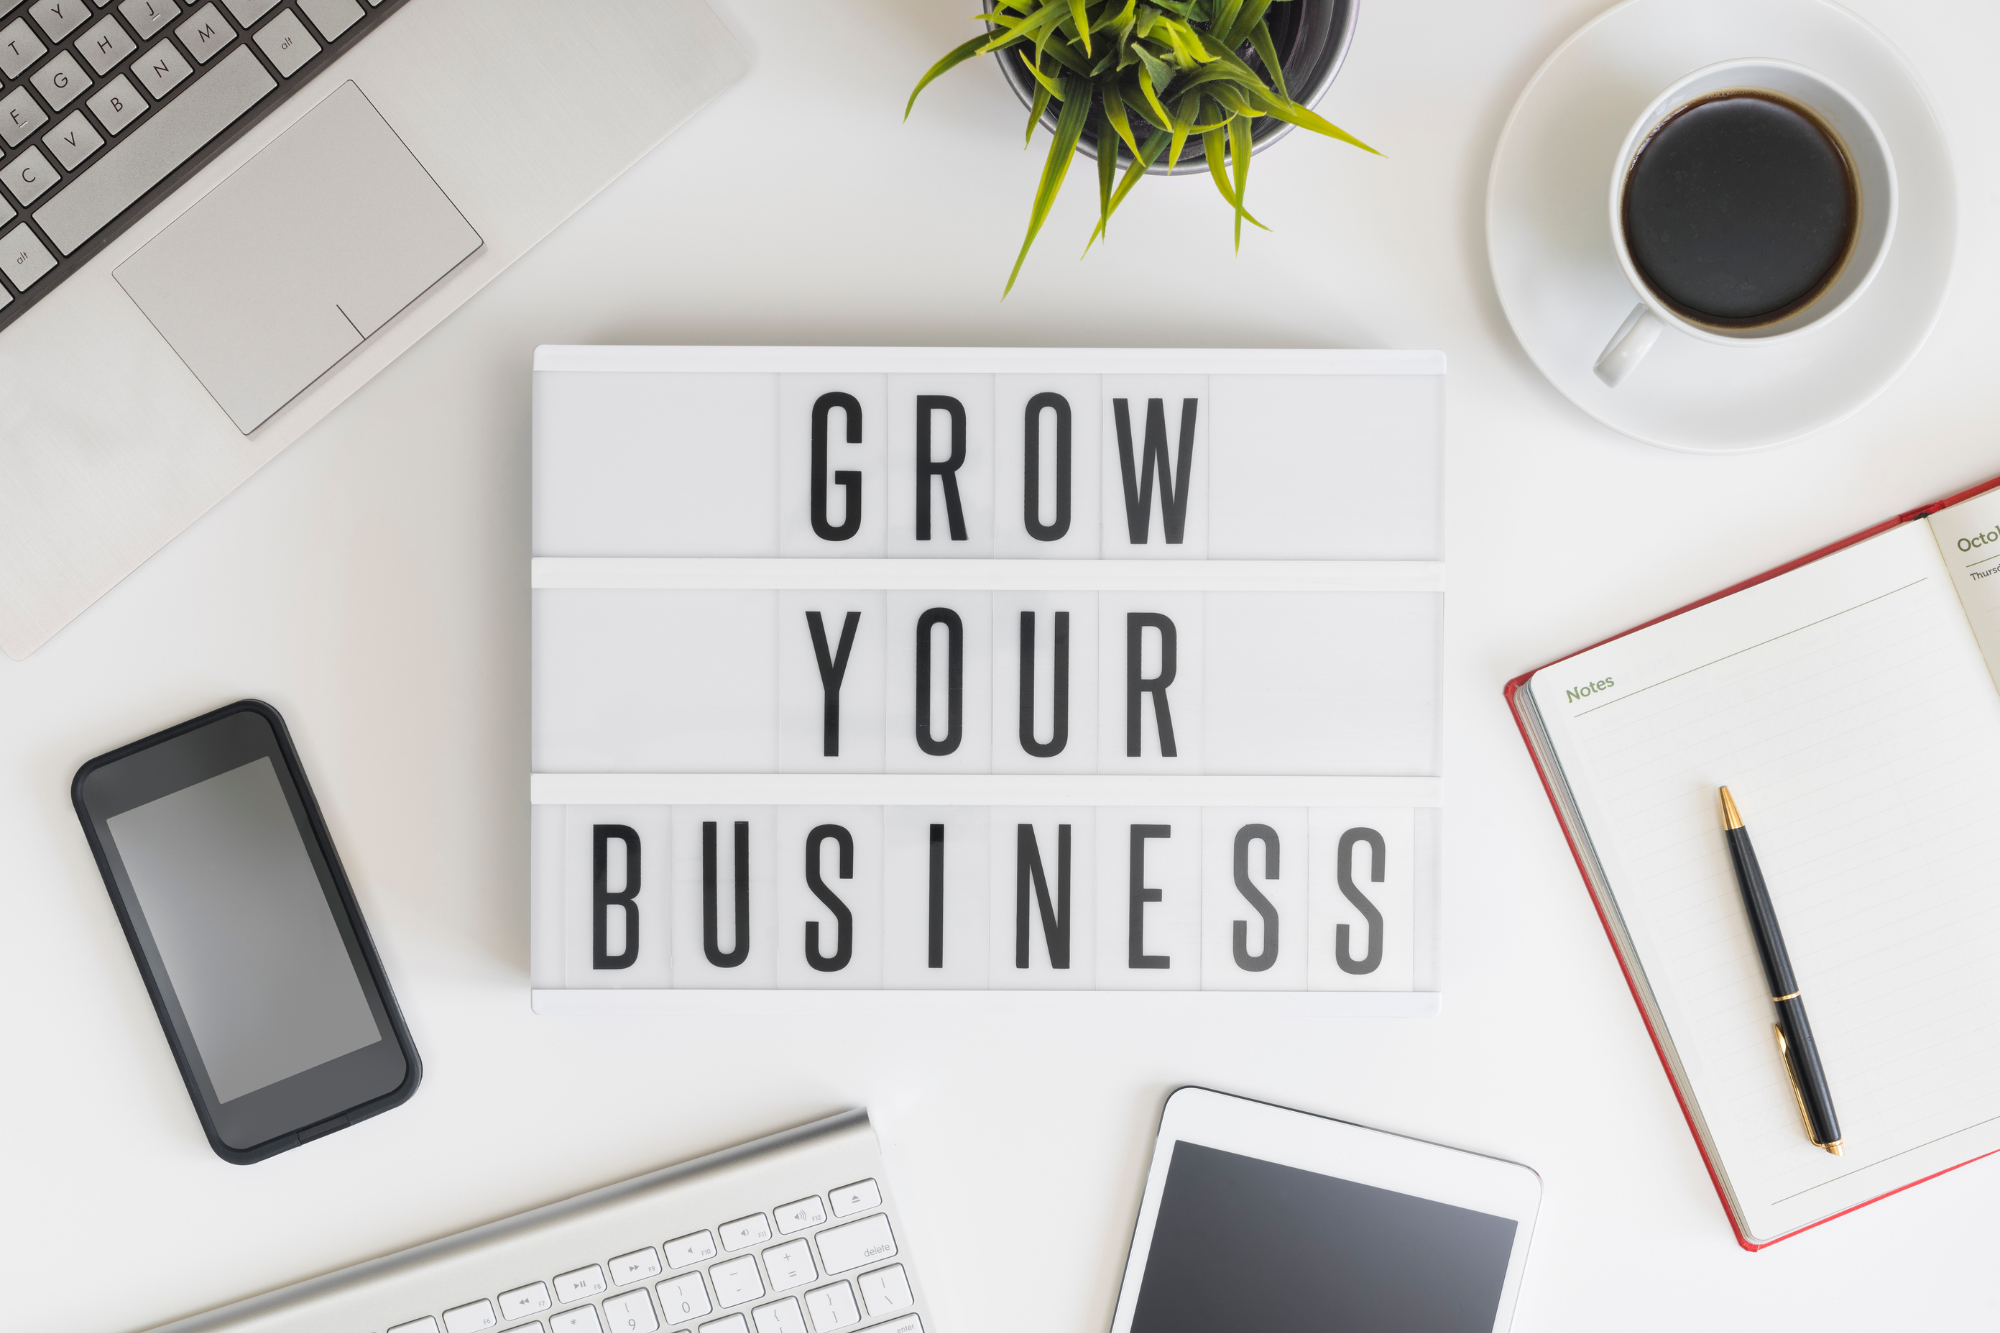 "Grow Your Business" sign laying on a work desk.